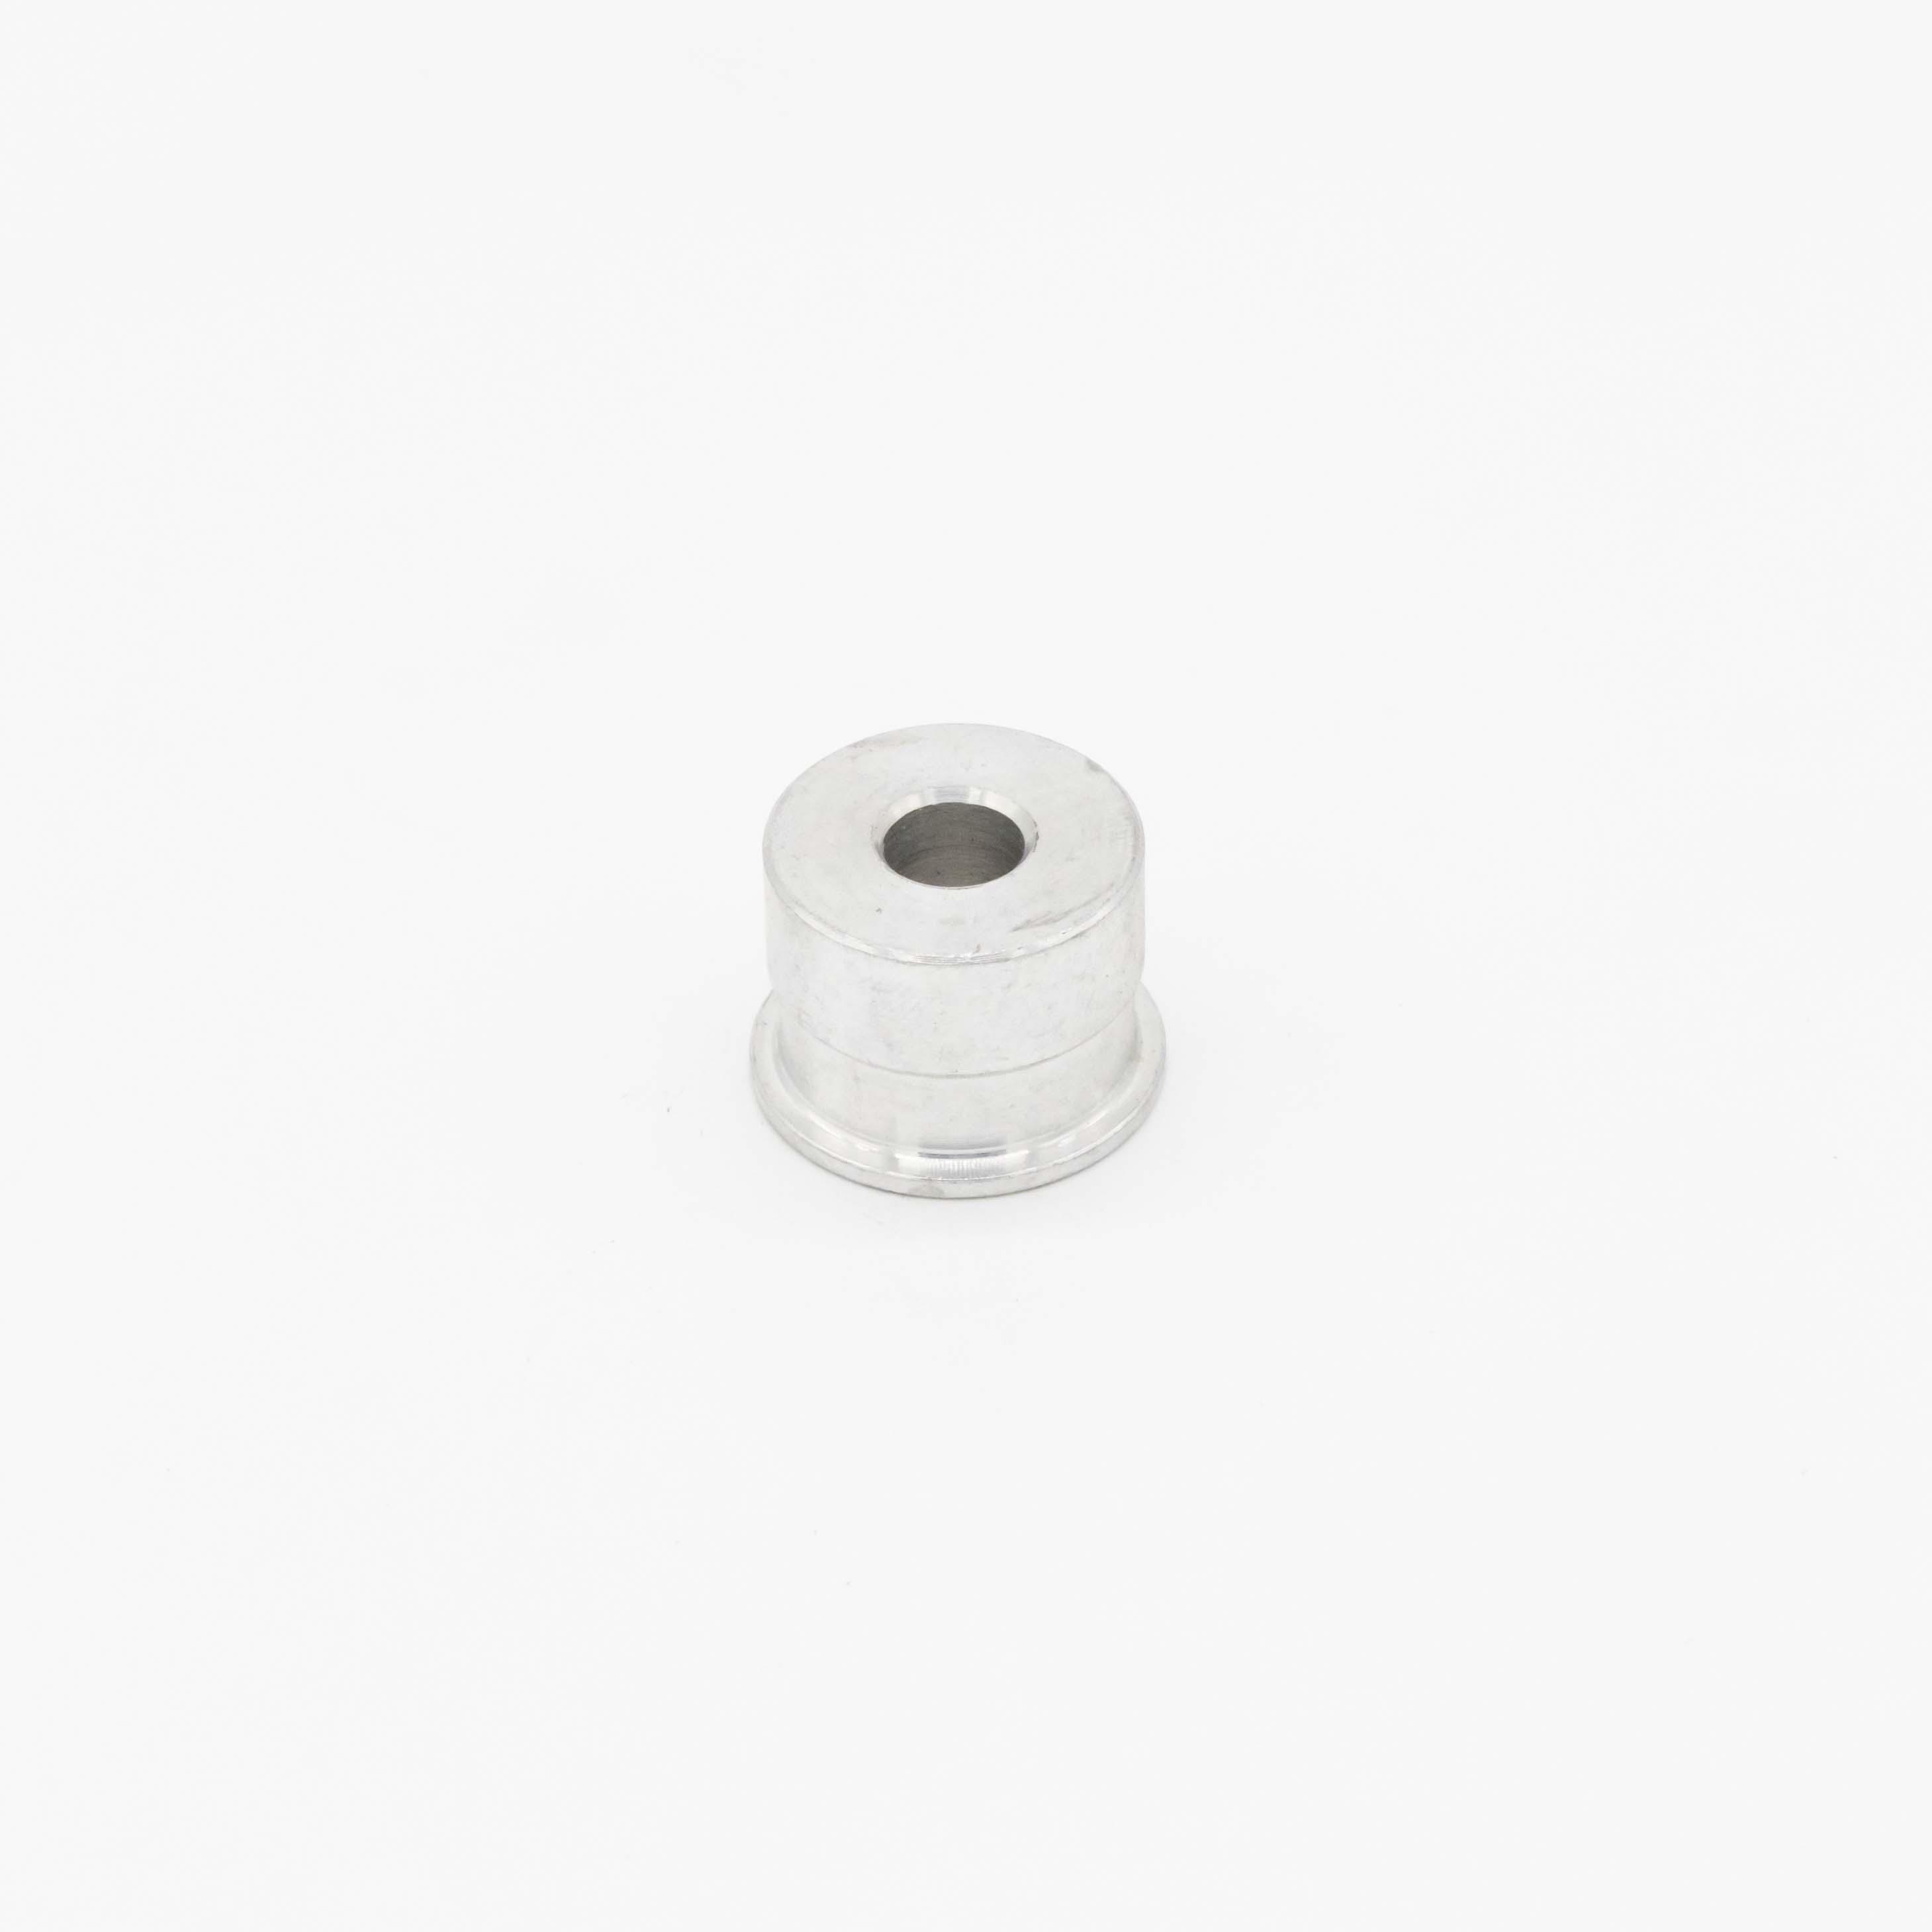 SPACER WHEEL 0202MM ASSEMBLY